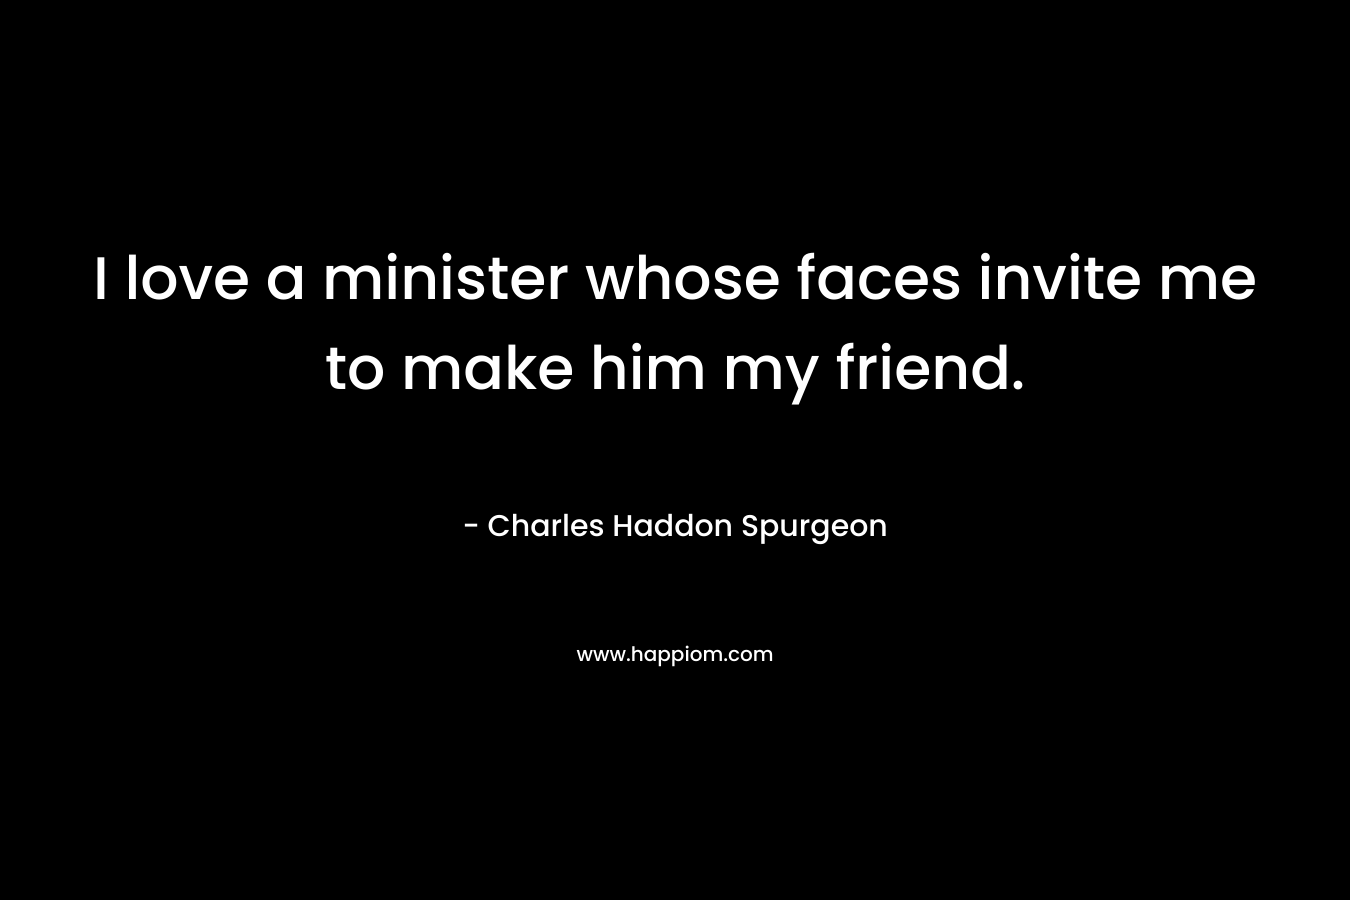 I love a minister whose faces invite me to make him my friend.